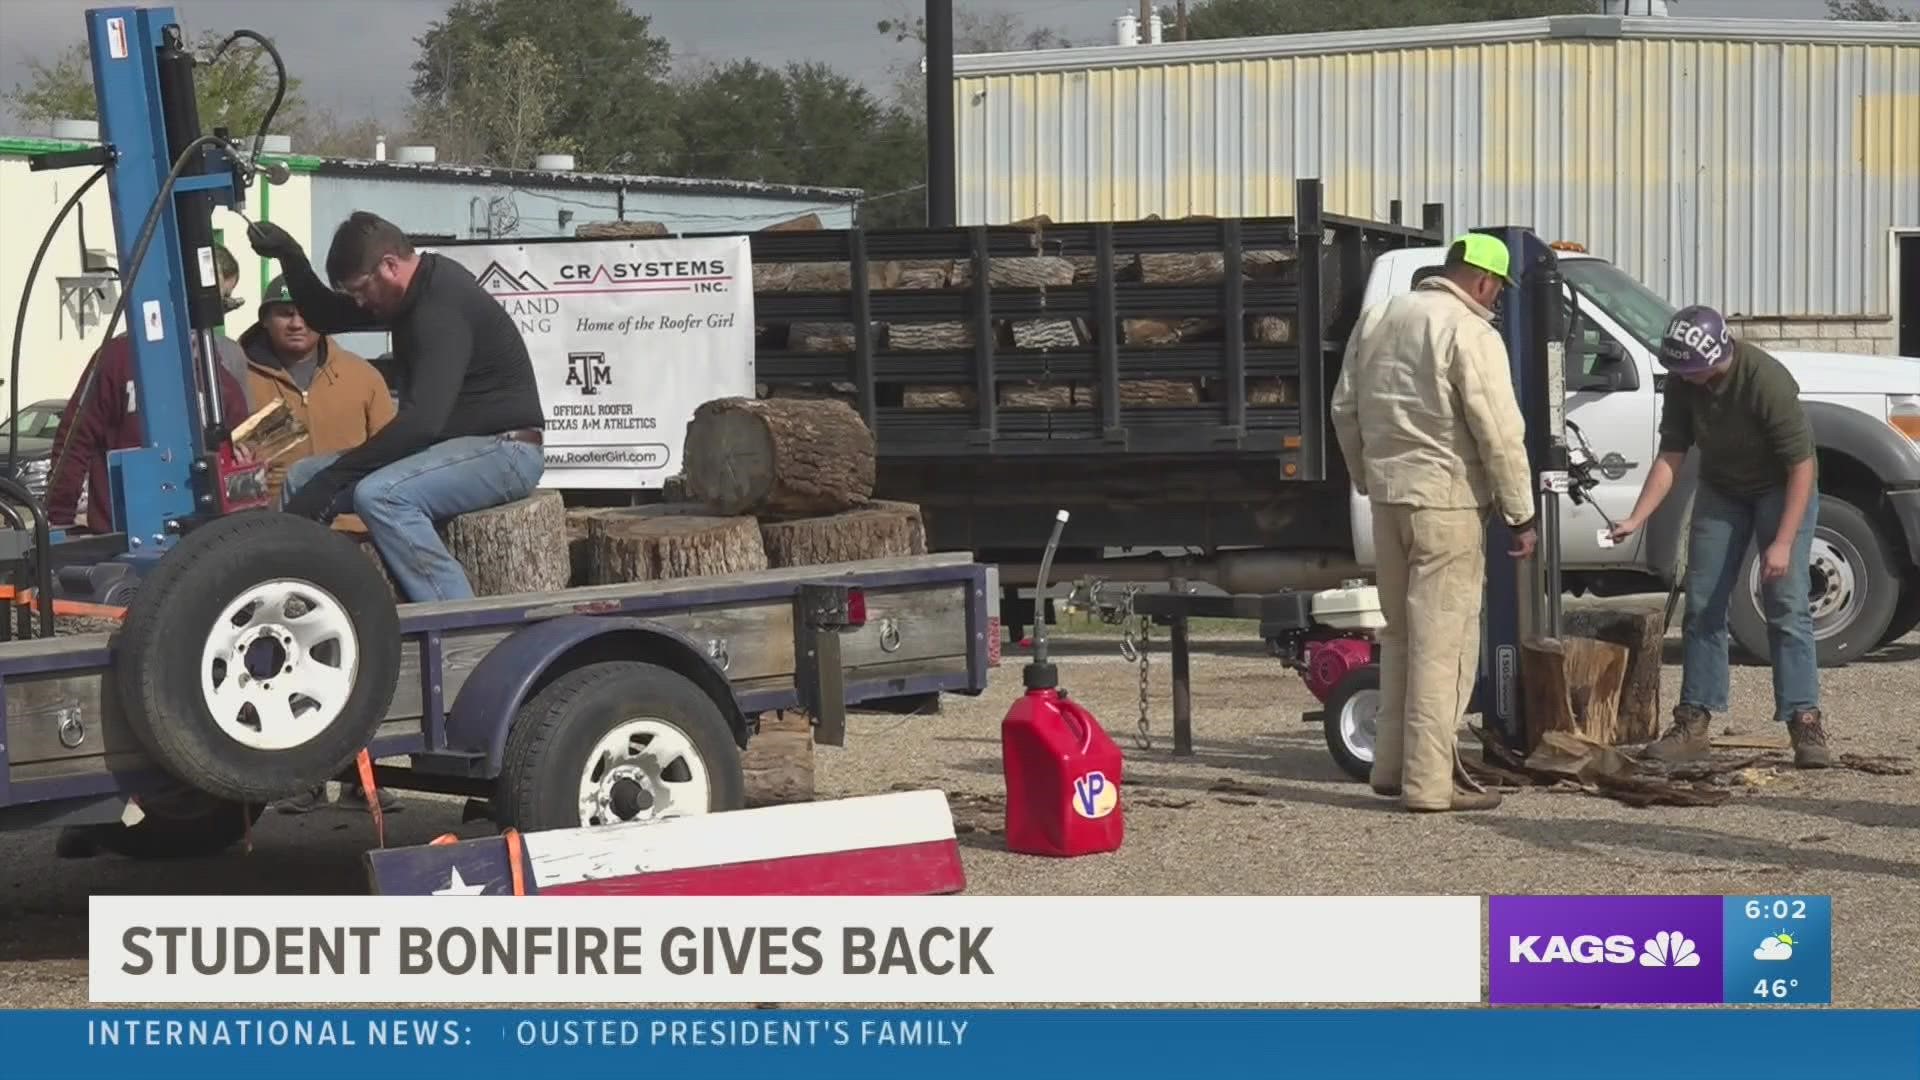 The organization distributed firewood for free at Chicken Oil Co. in Bryan to those in need of resources to stay warm ahead of the frigid weather this weekend.